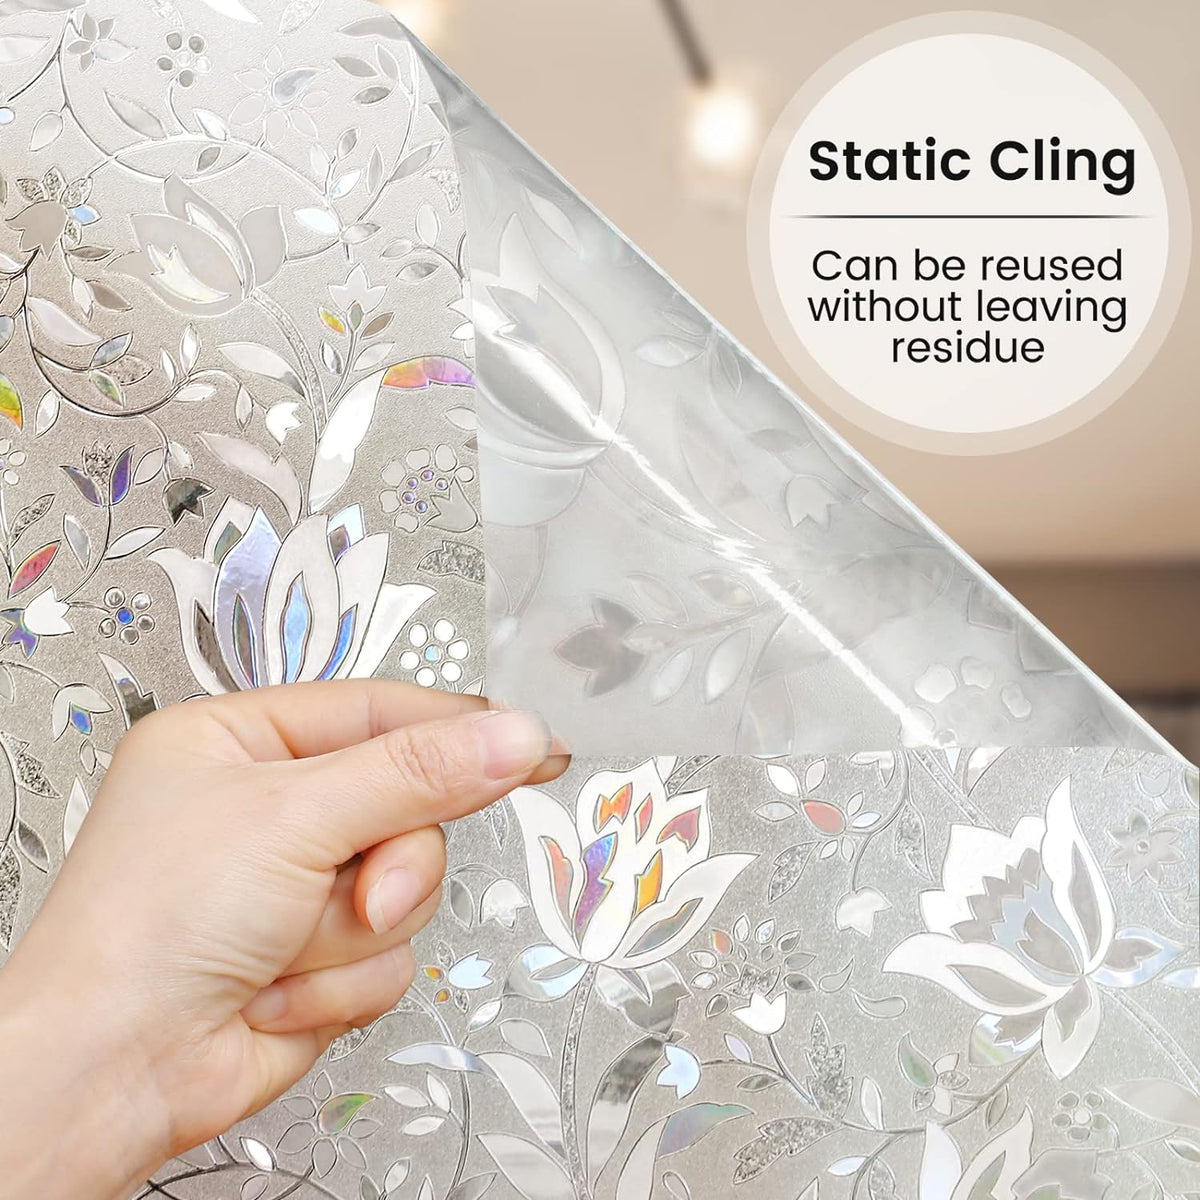 Decorative 3D Floral Window Sticker- Home Decor, Privacy,UV Protection, Heat Control: Discover the Secret to Stylish & Safe Living